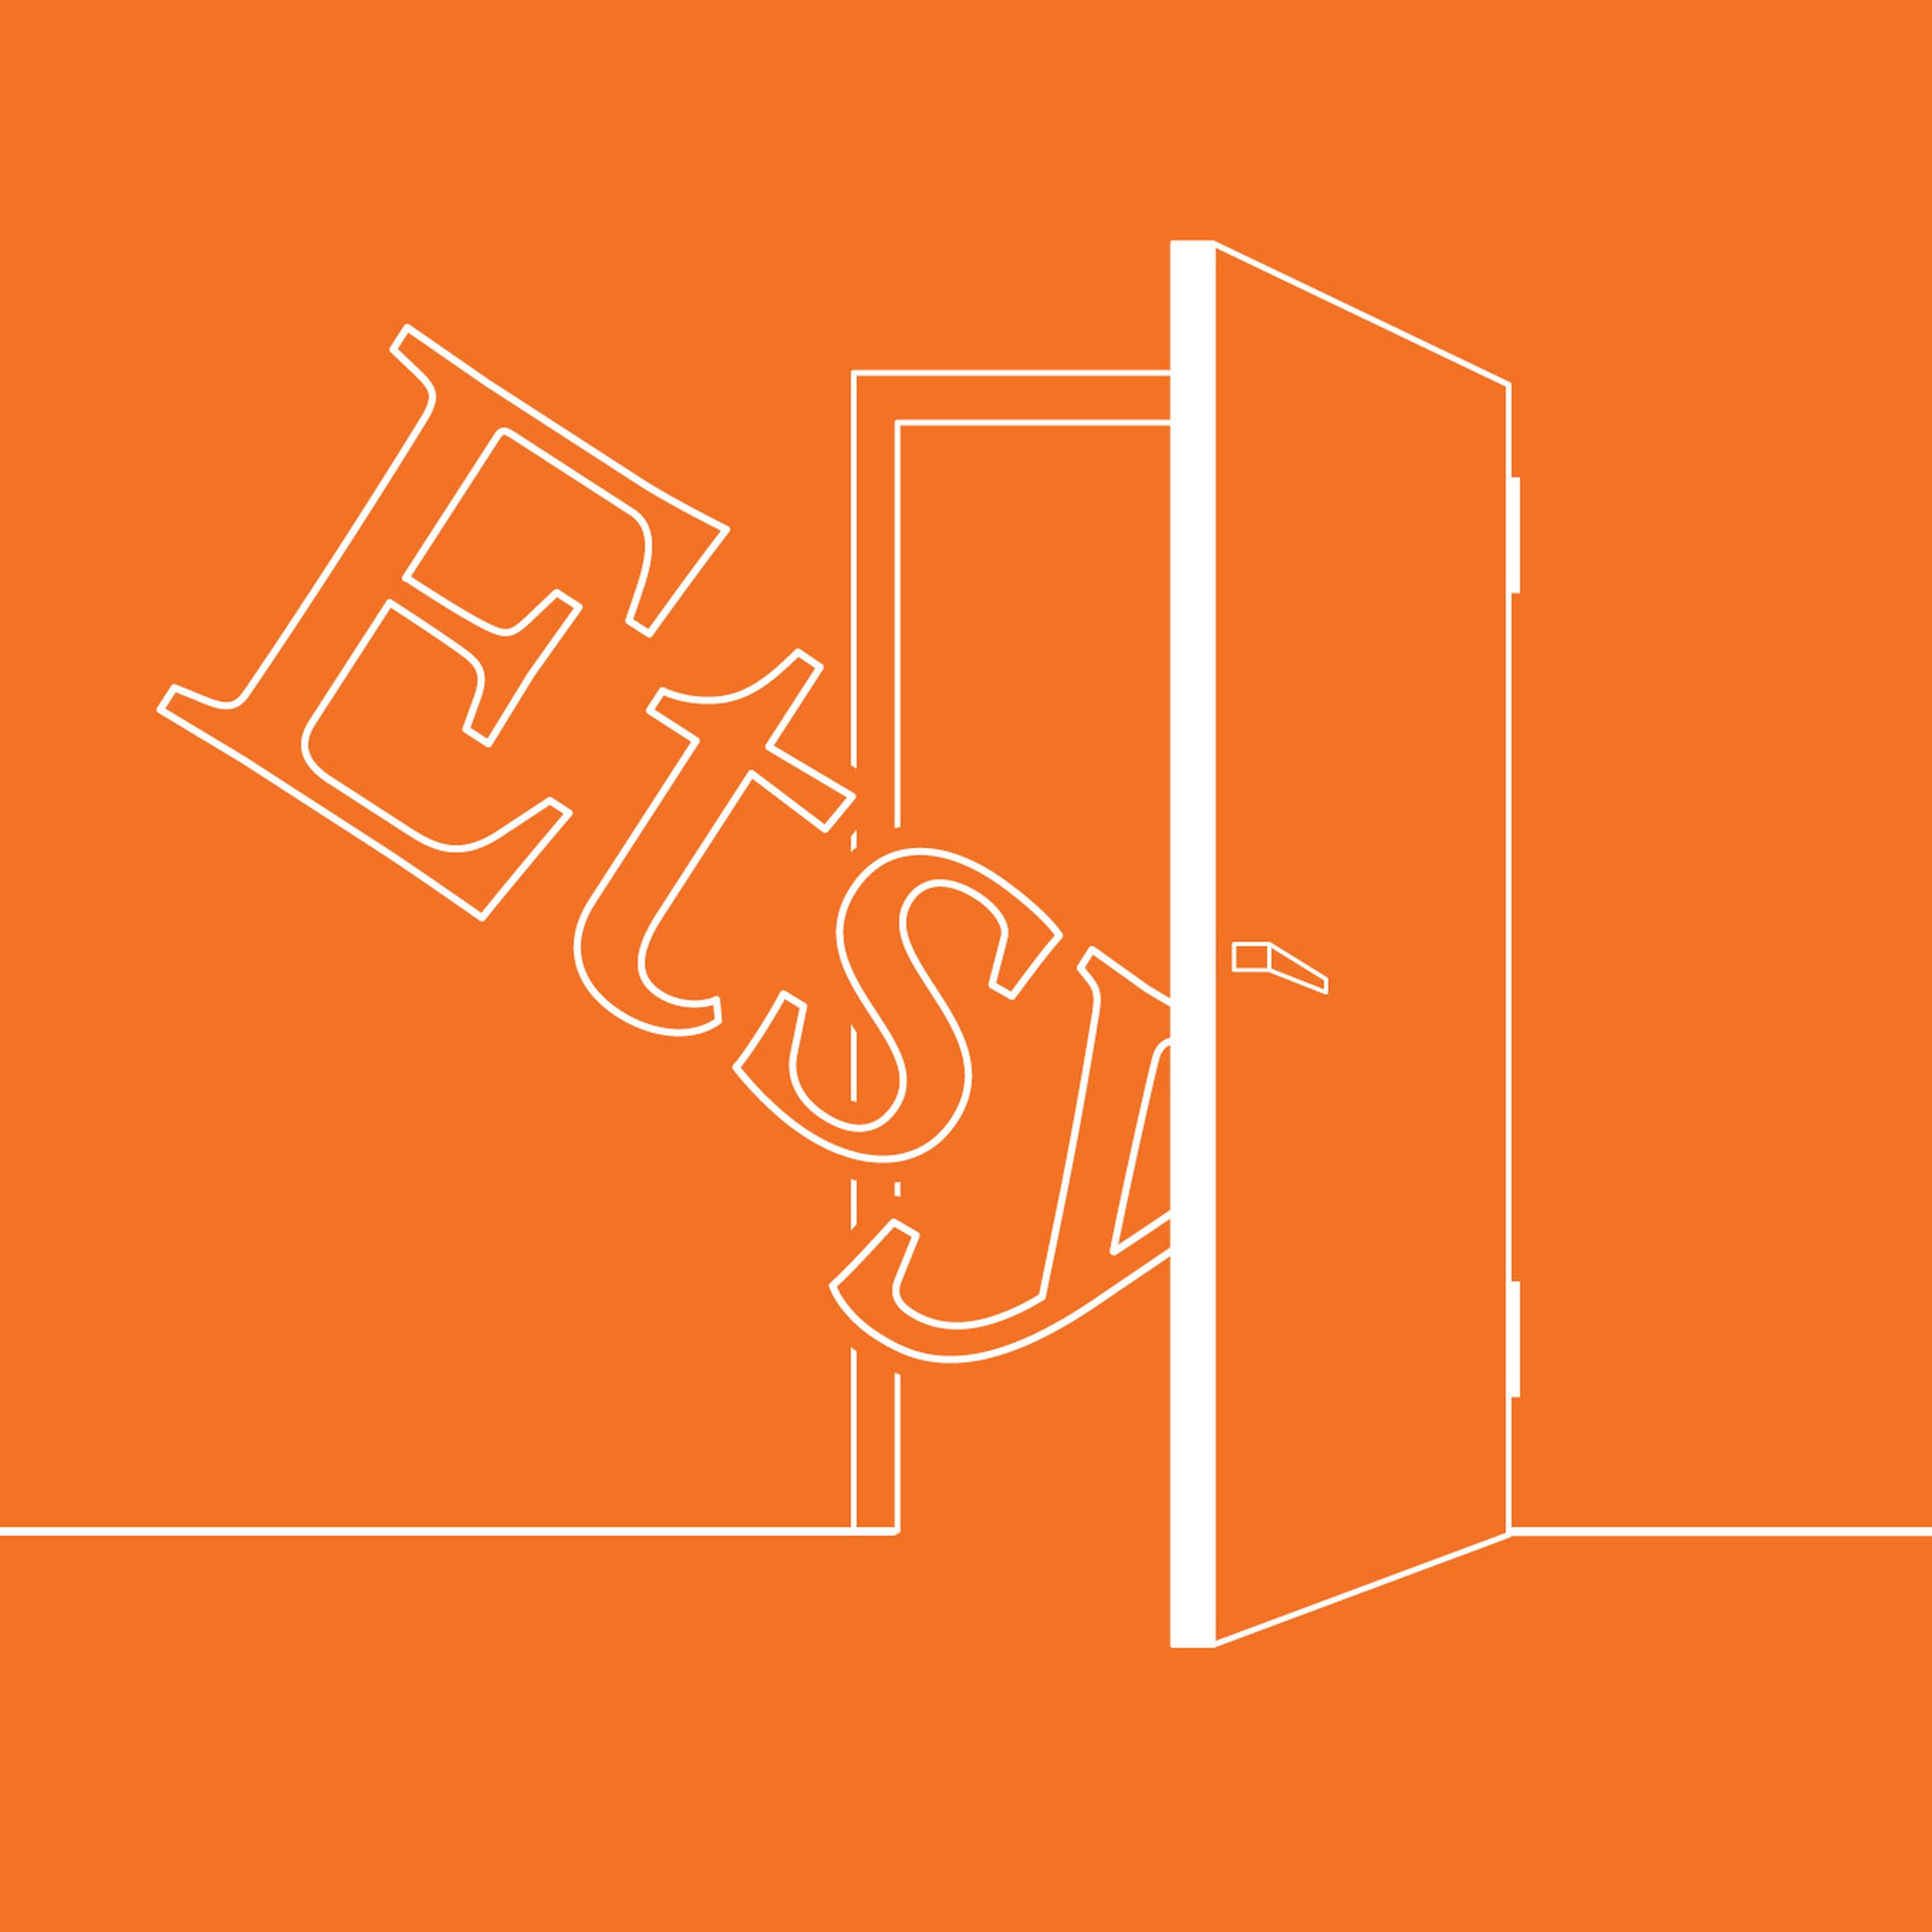 An orange illustration showing the word Etsy going out of an open door